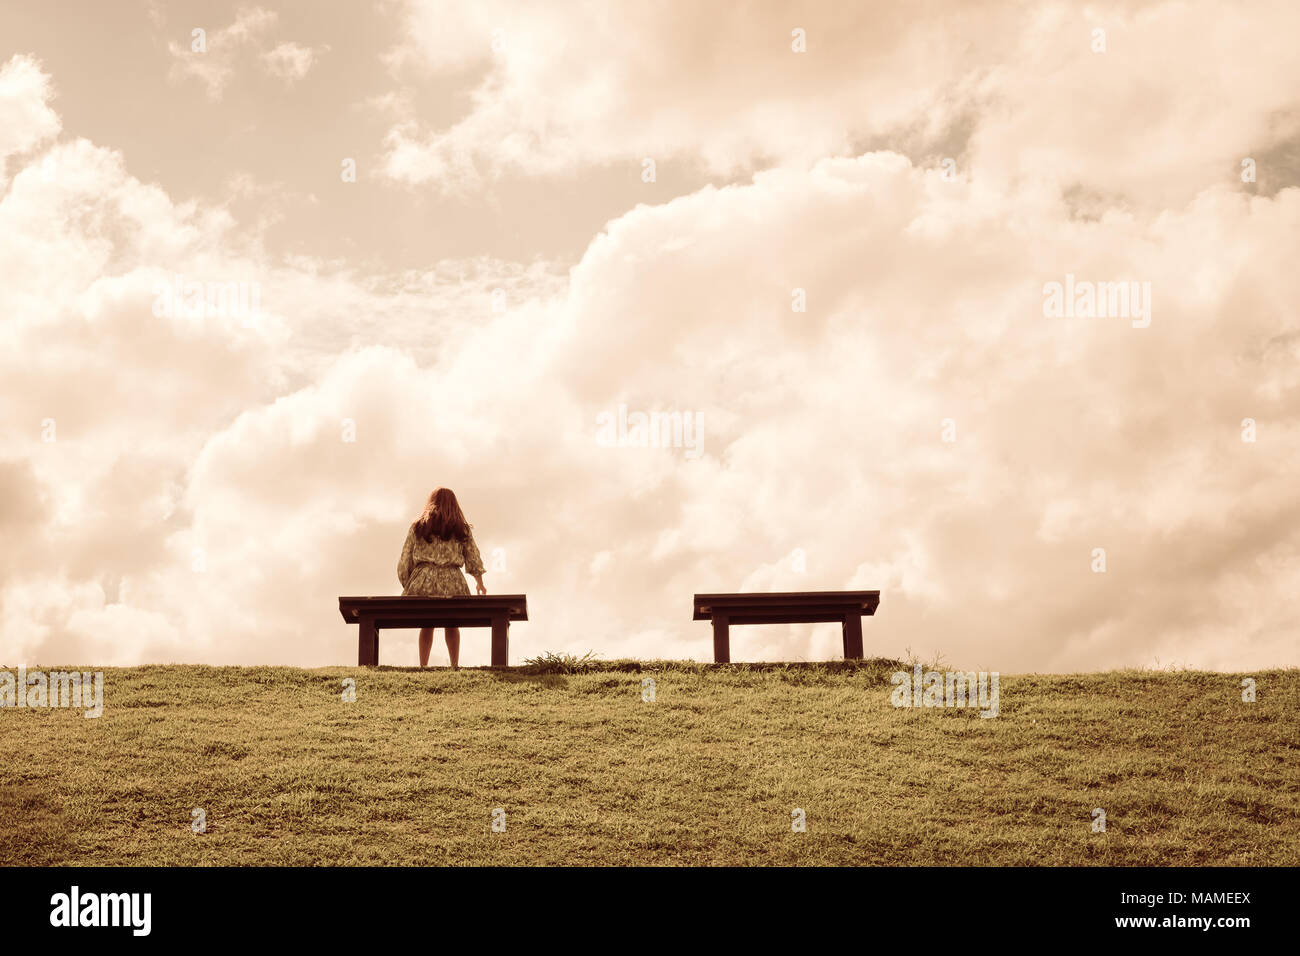 a women sitting alone on a bench waiting for love, alone concept Stock Photo